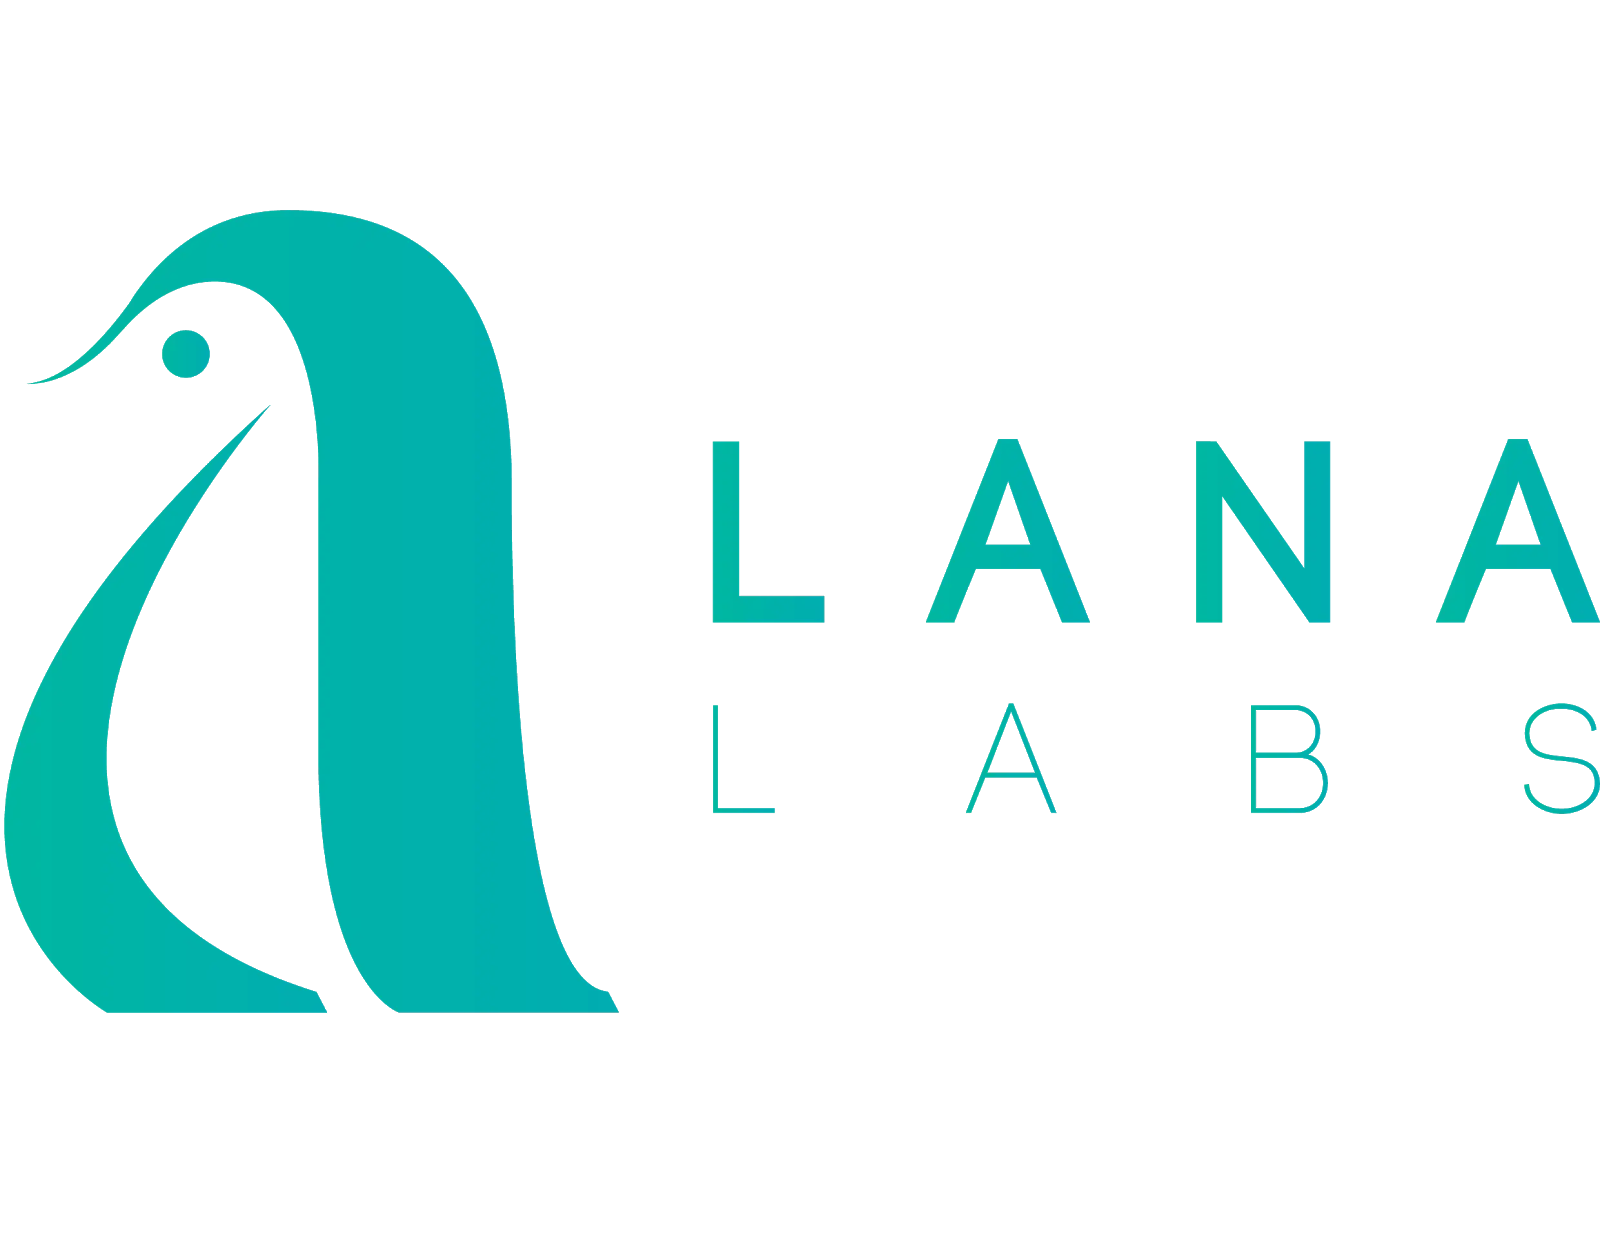 Company logo for Lana Labs process mining: a green penguin silhouette.